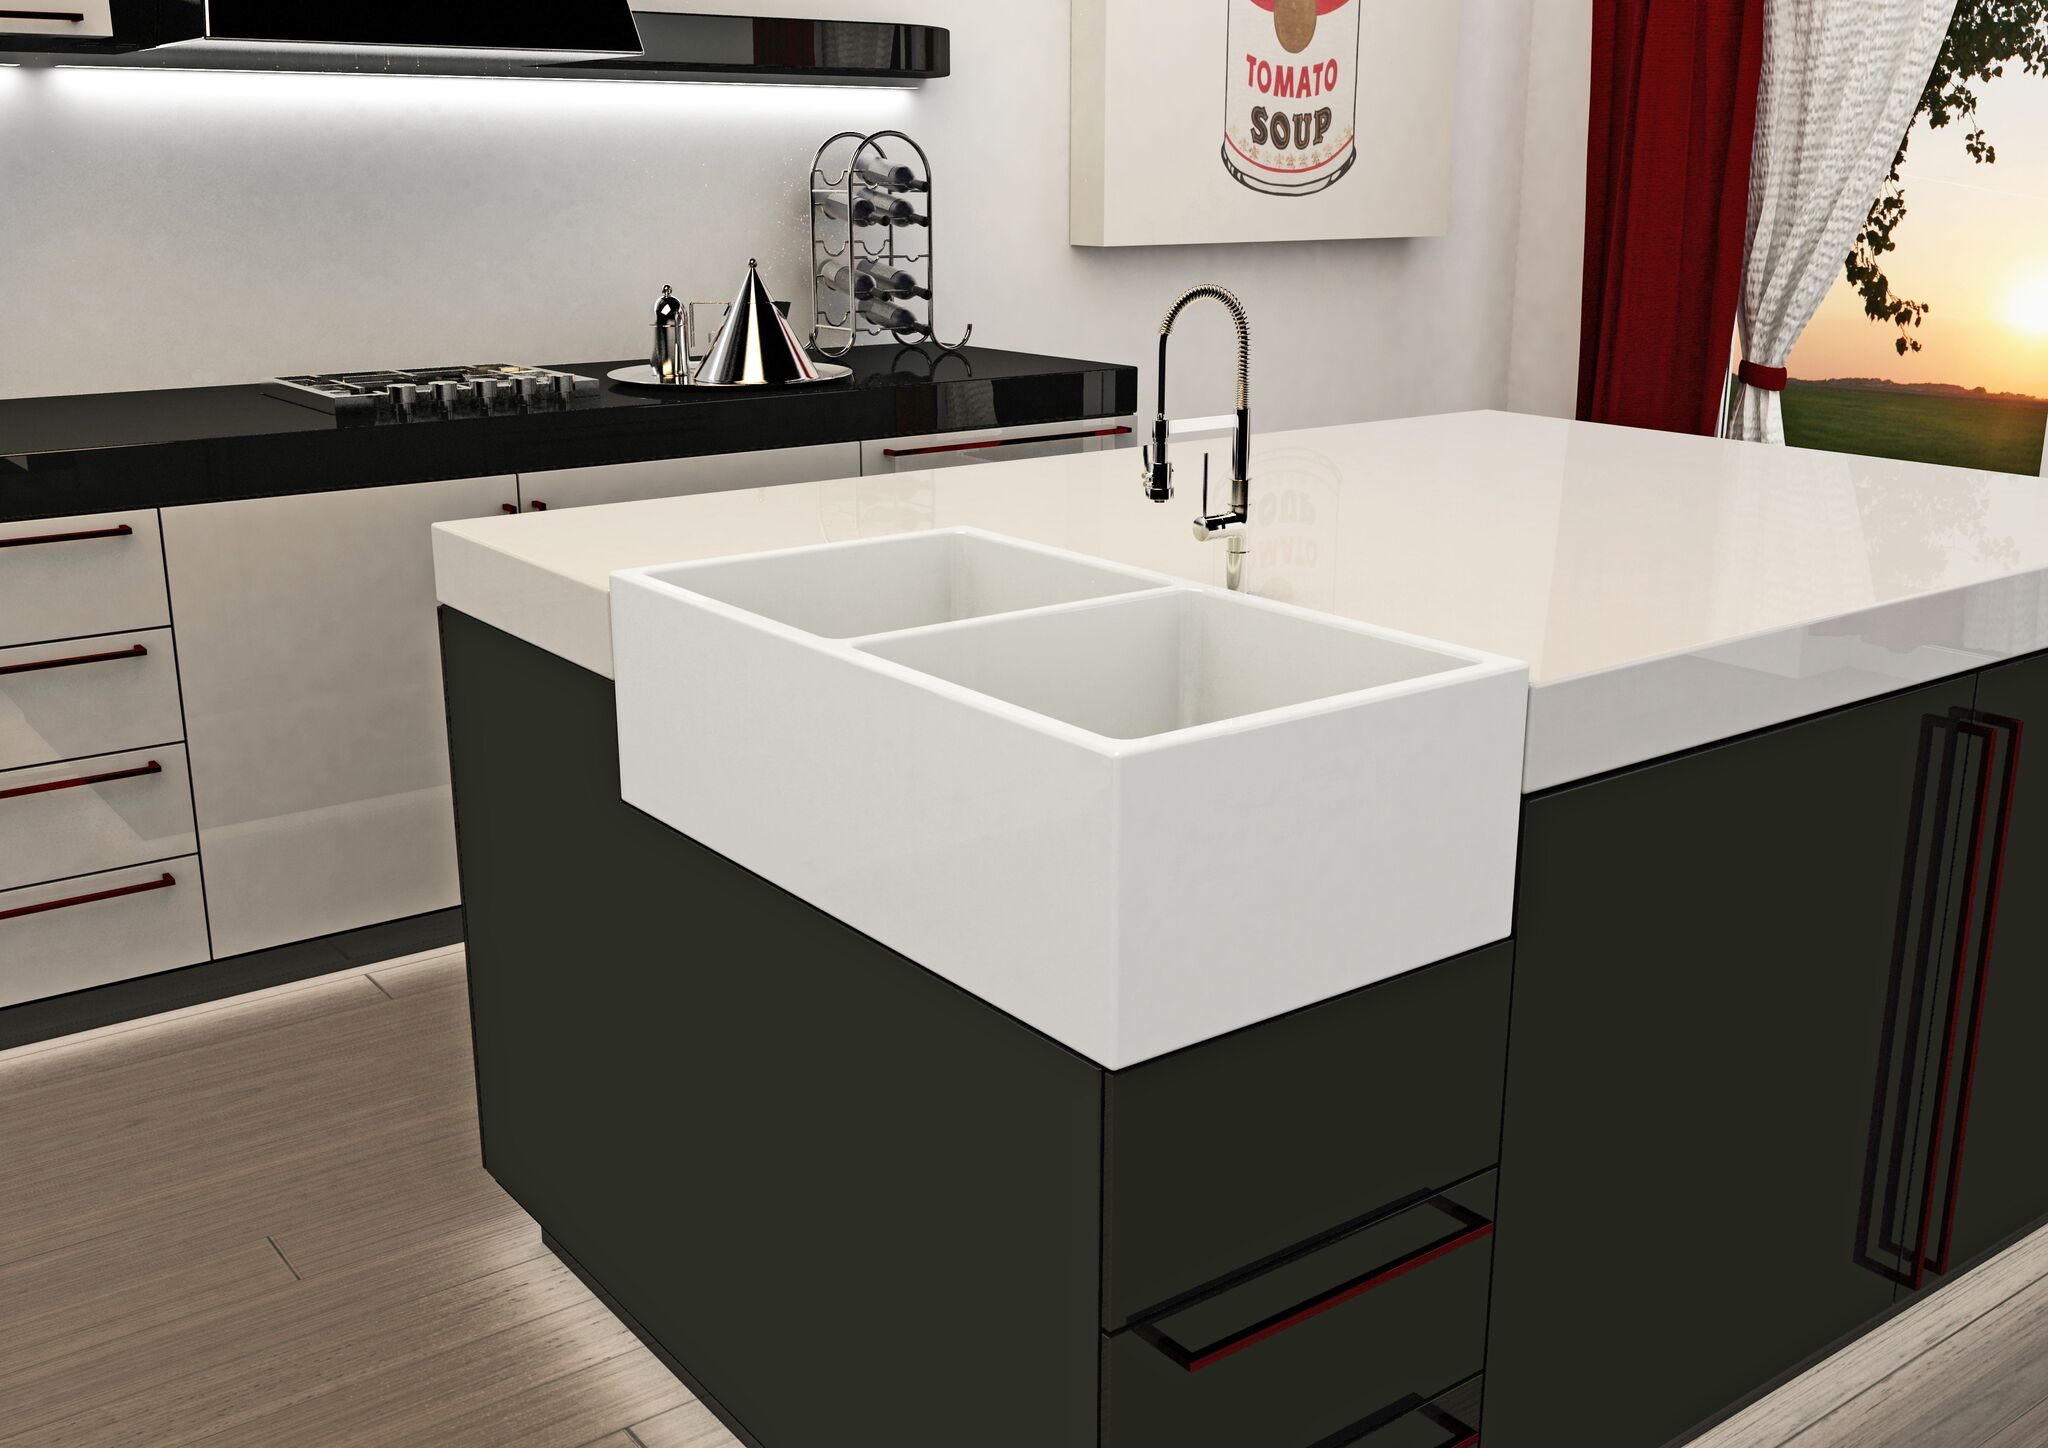 cool looking kitchen sink